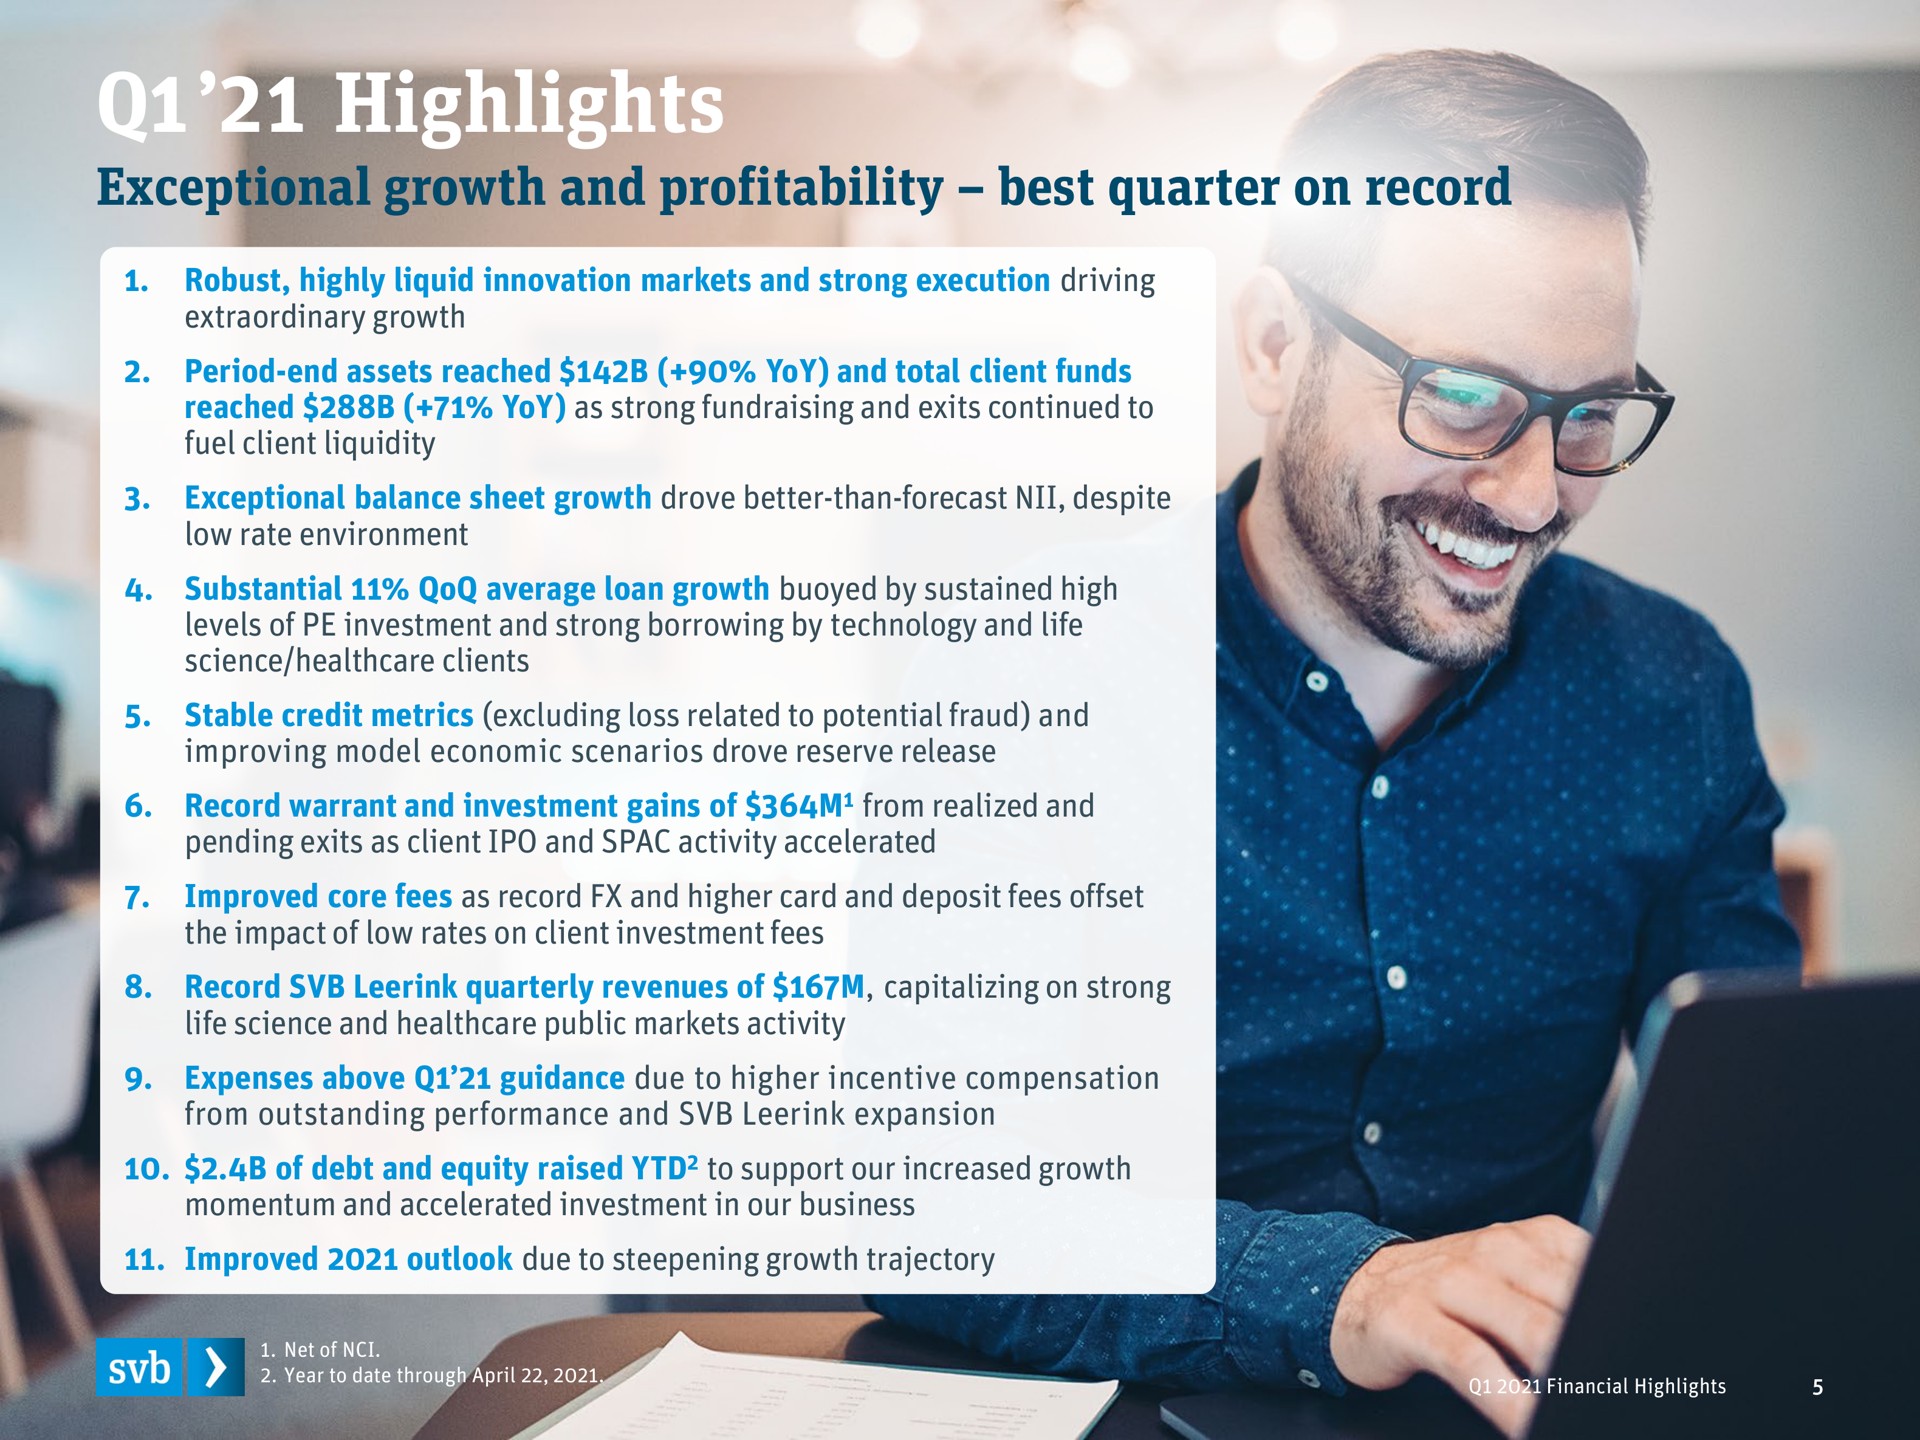 highlights exceptional growth and profitability best quarter on record | Silicon Valley Bank